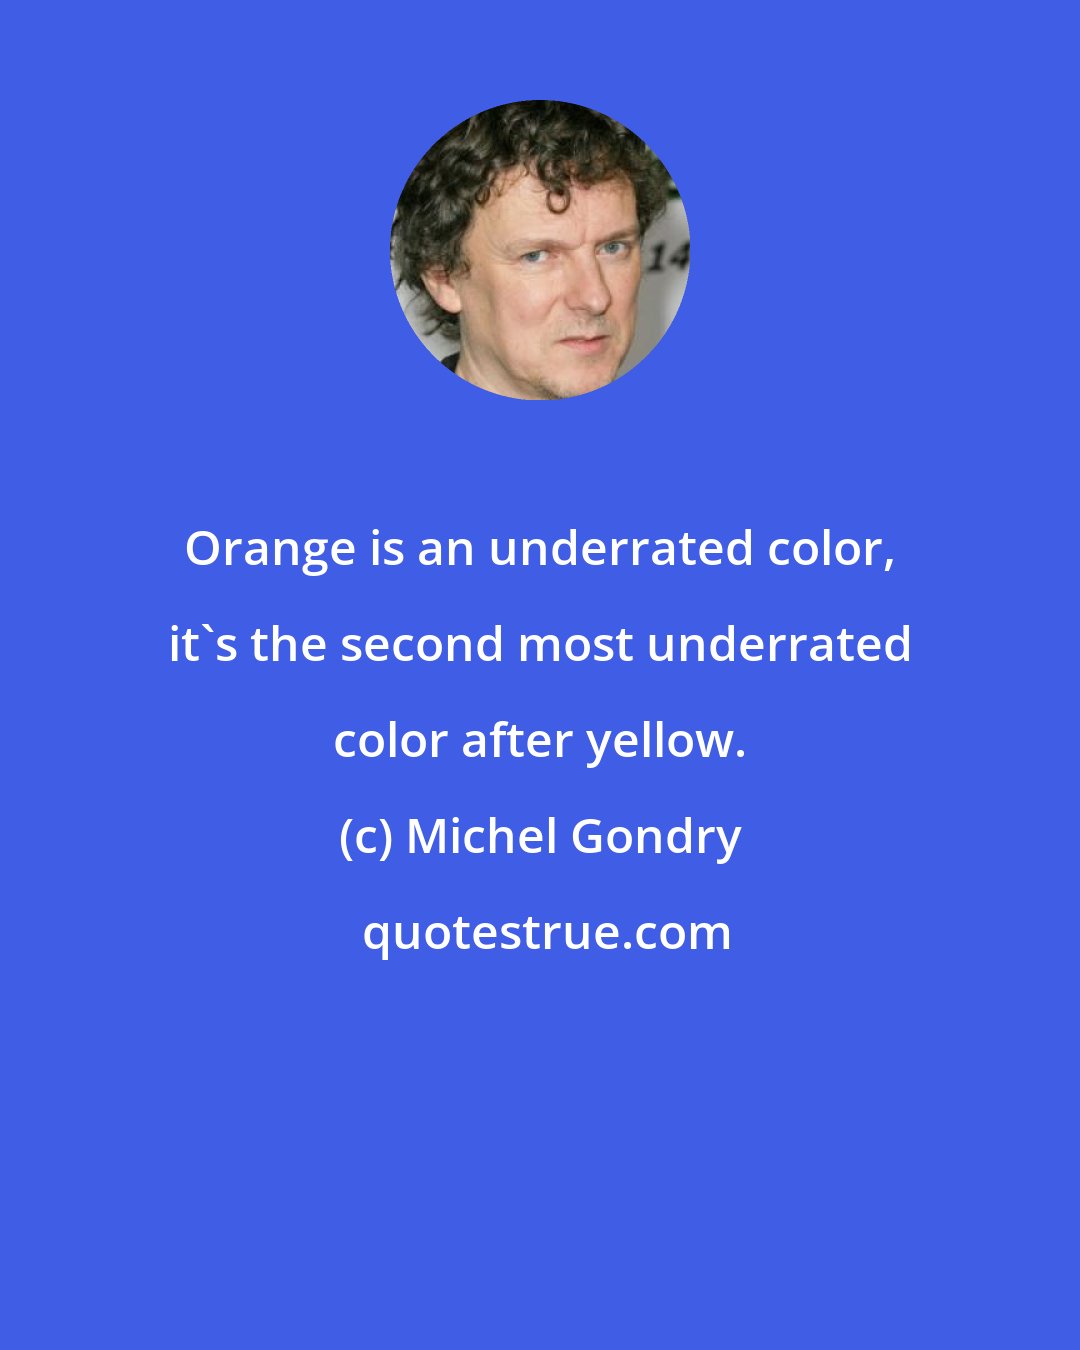 Michel Gondry: Orange is an underrated color, it's the second most underrated color after yellow.